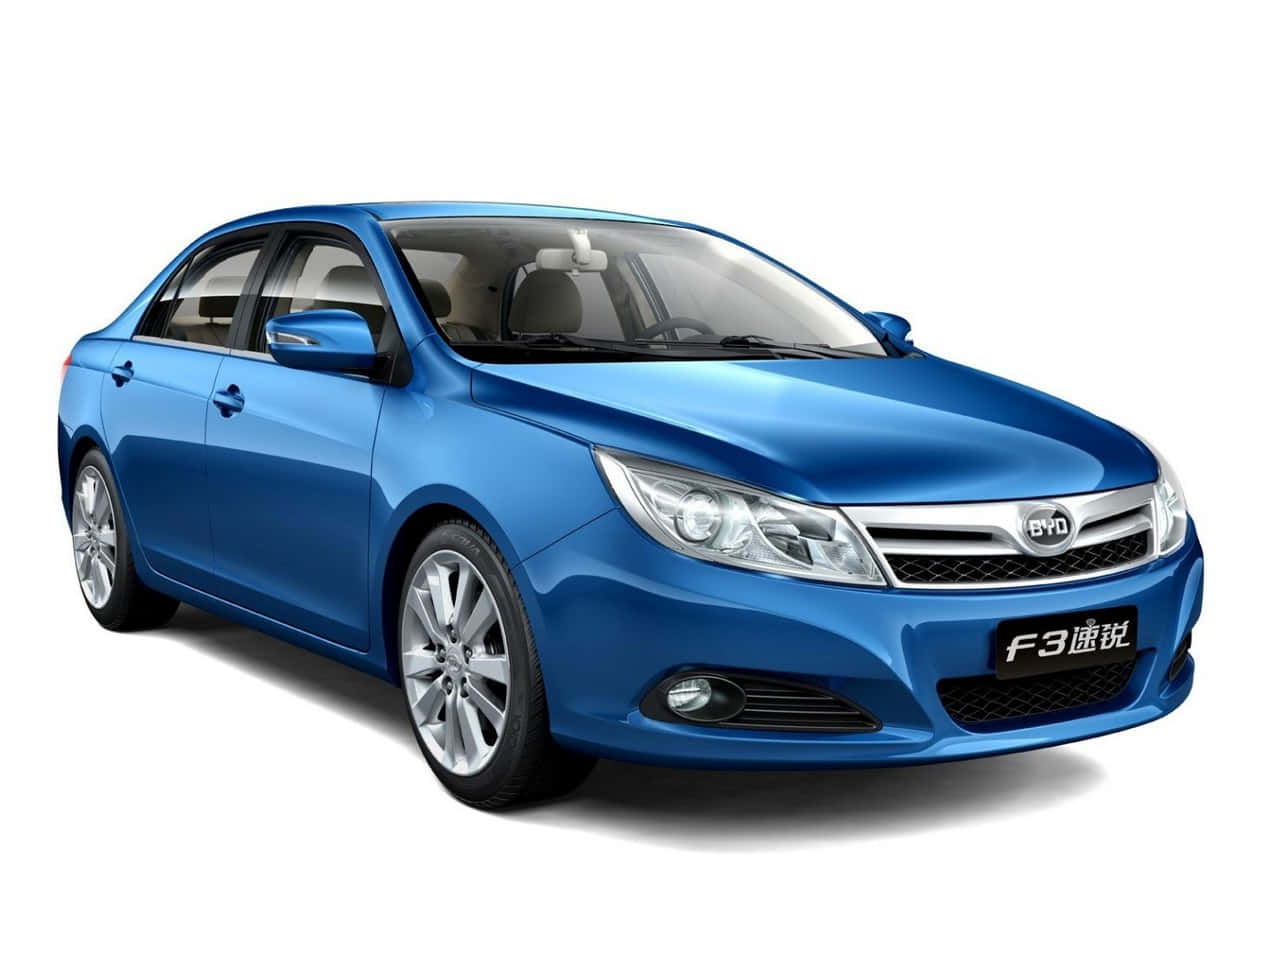 Sleek BYD Electric Vehicle in action Wallpaper